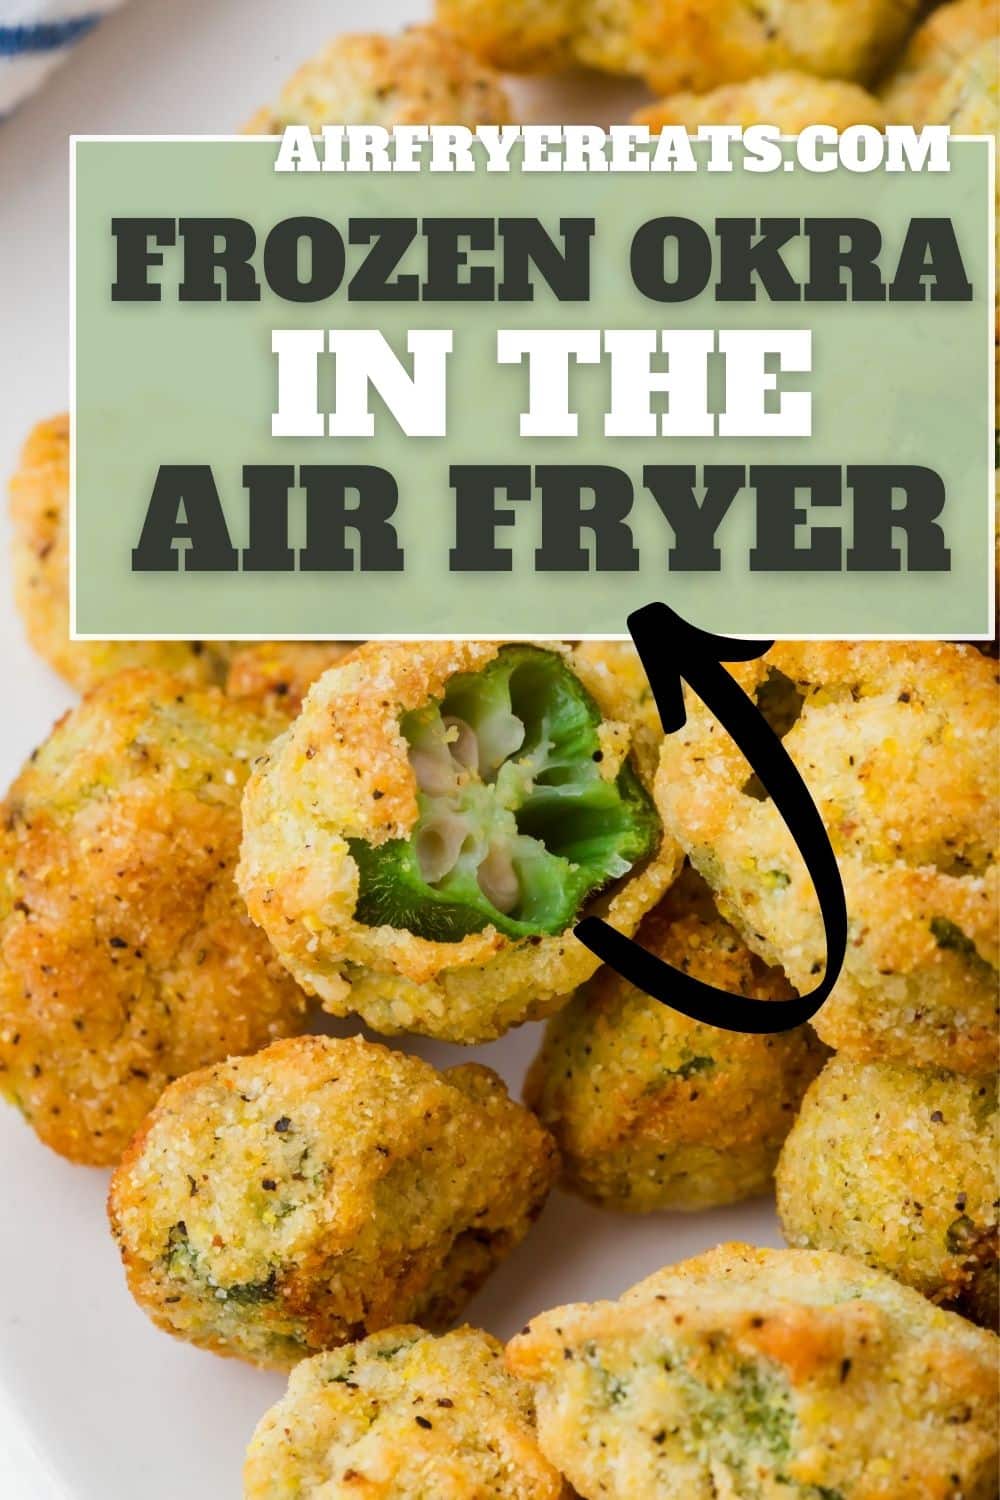 closeup of a plate of air fryer frozen okra. One pice has been bitten to show the interior texture. Green box includes text that says "frozen okra in the air fryer"